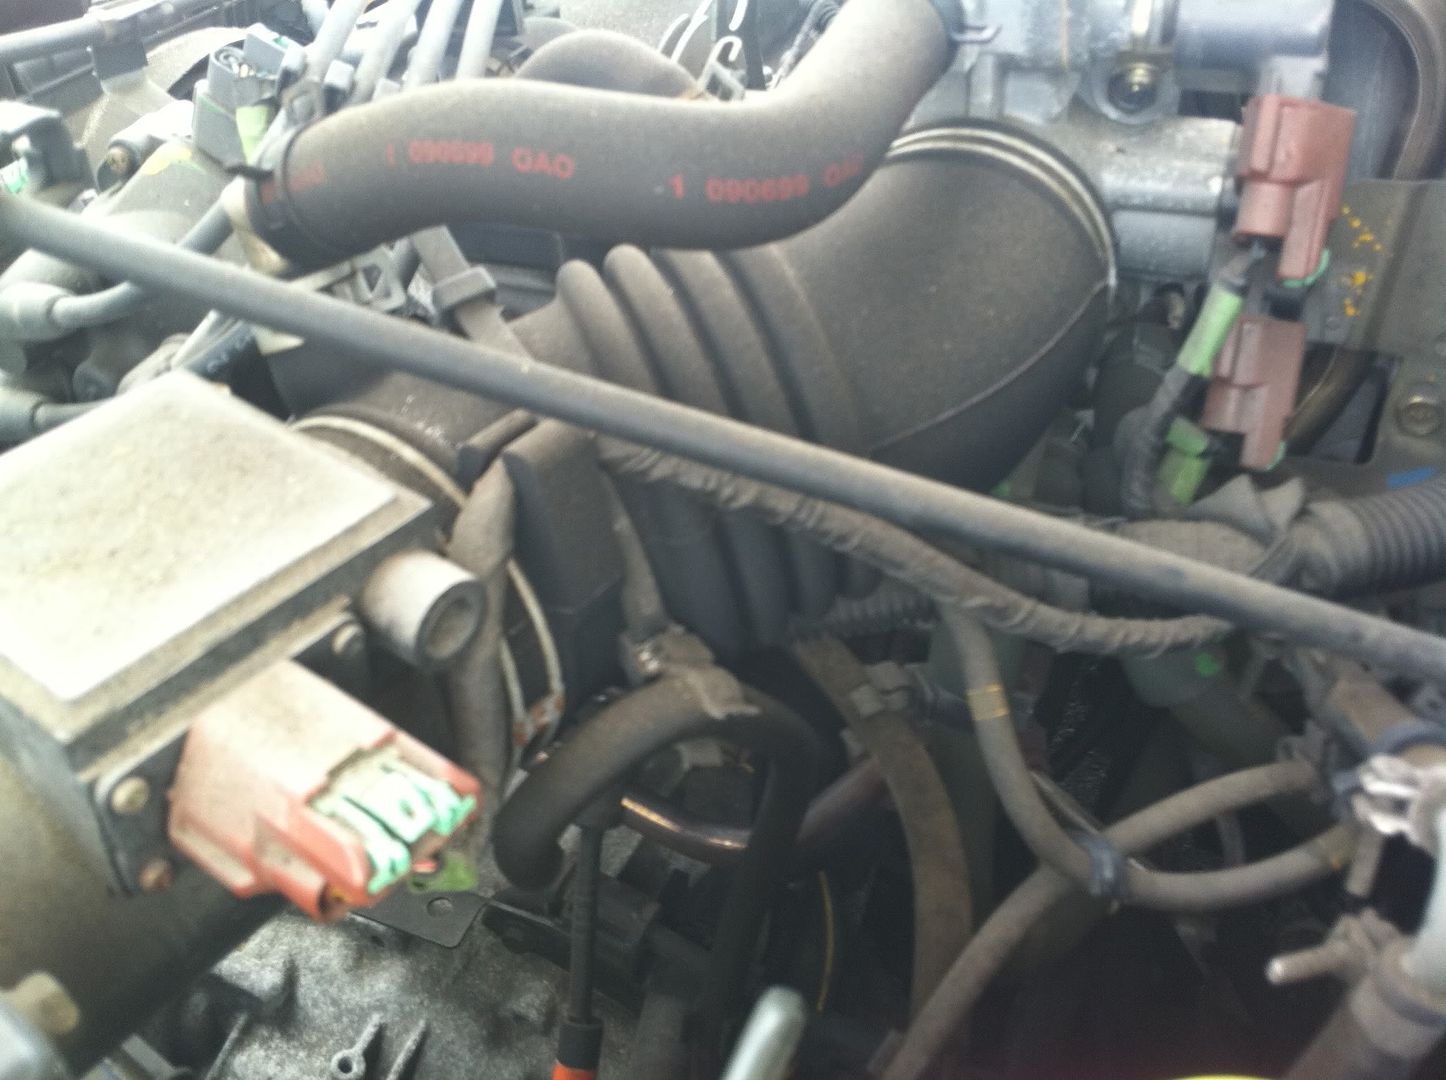 How to change a starter on a 1993 nissan sentra #6